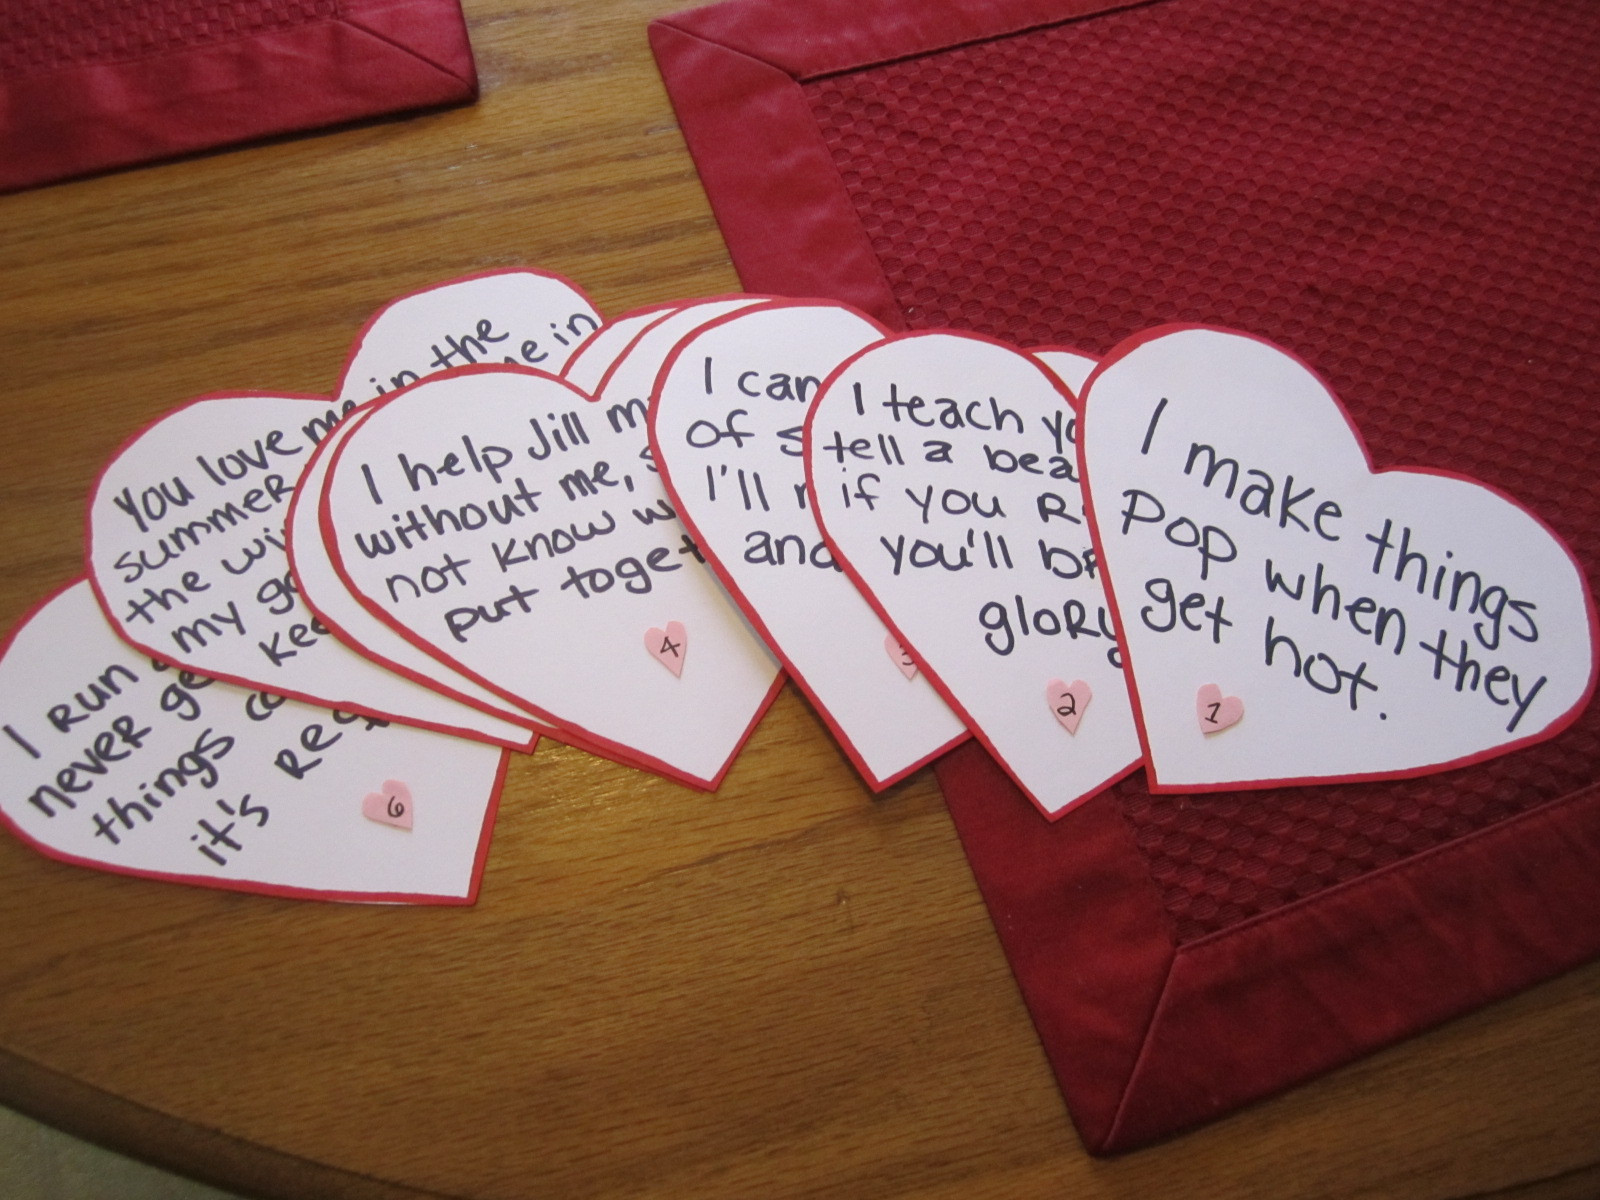 Creative Valentines Day Gifts
 Ten DIY Valentine’s Day Gifts for him and her